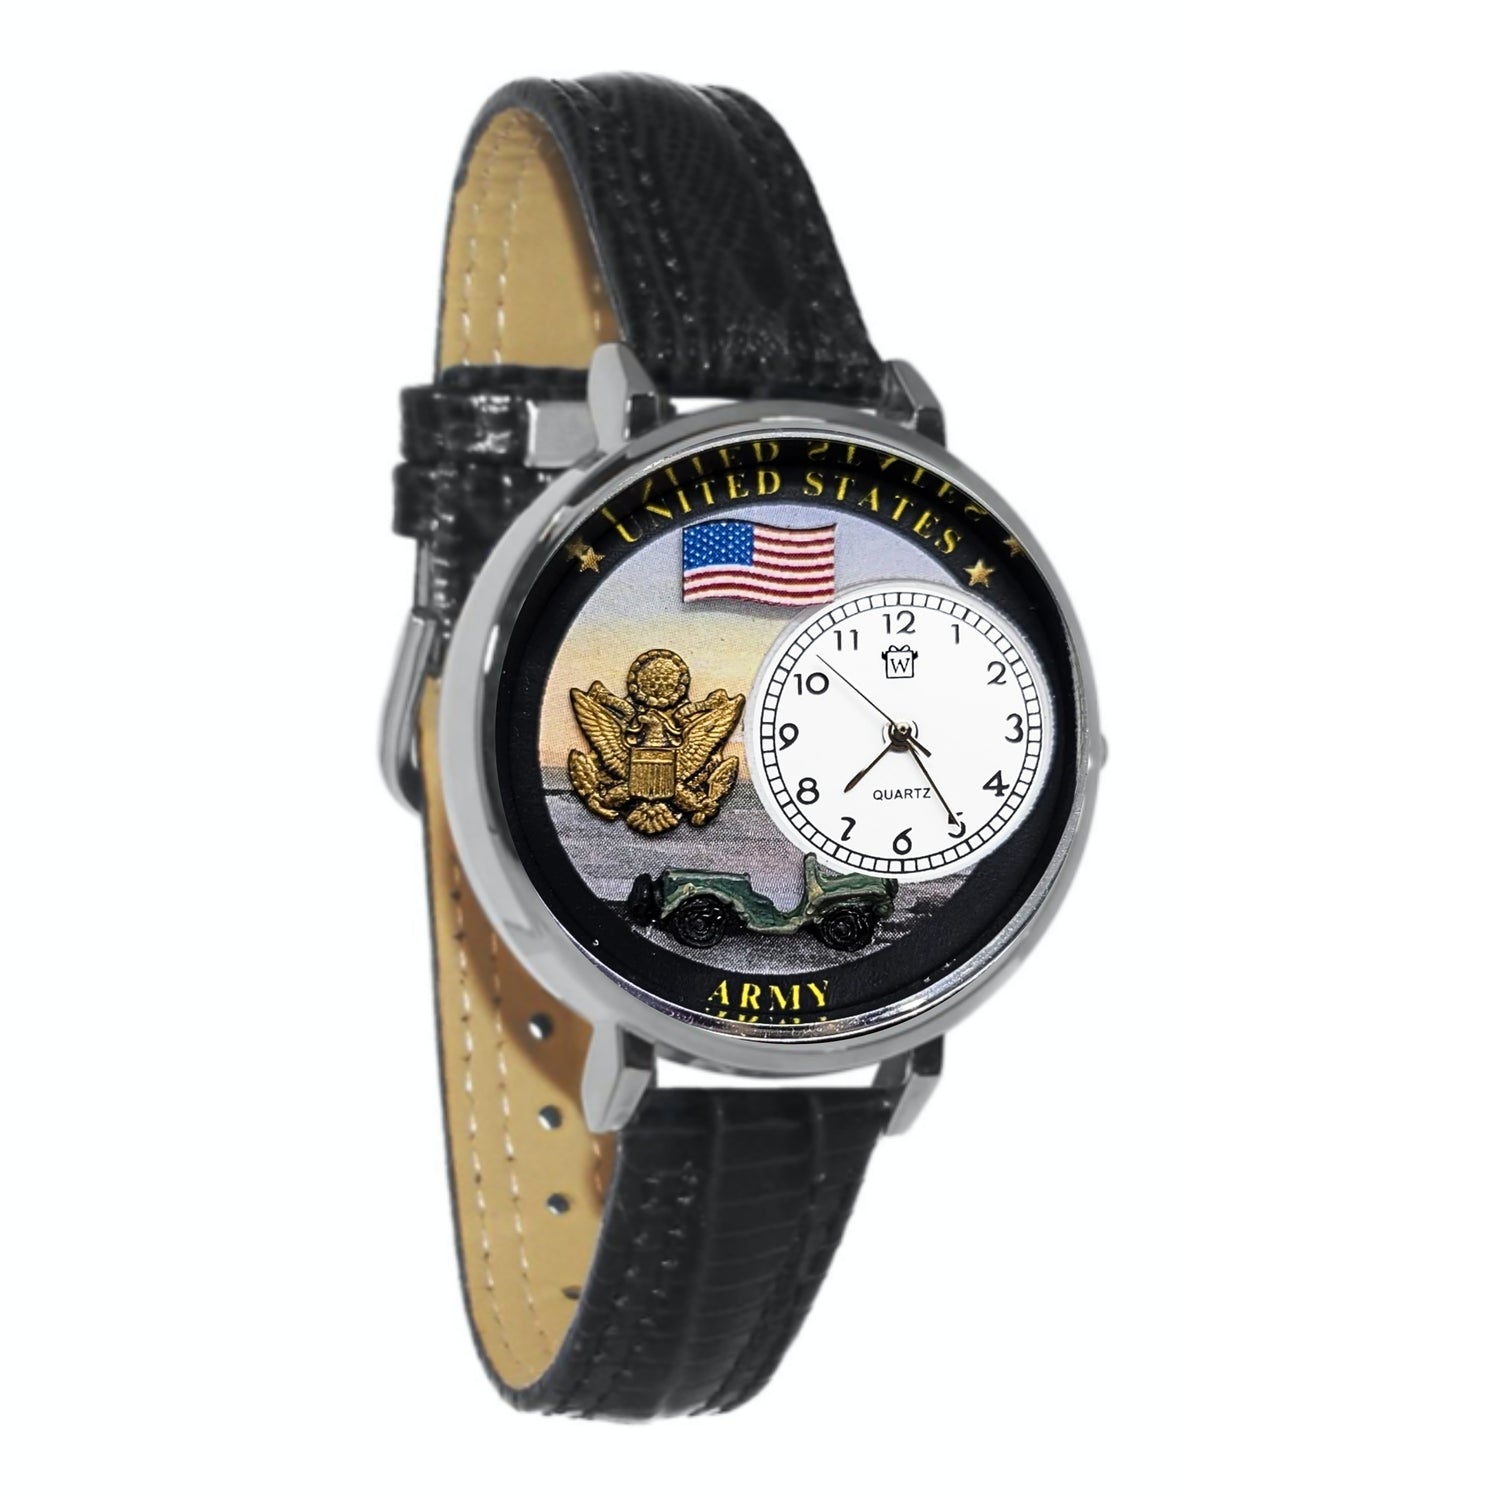 Whimsical Gifts | United States Army 3D Watch Large Style | Handmade in USA | Patriotic |  | Novelty Unique Fun Miniatures Gift | Silver Finish Black Leather Watch Band